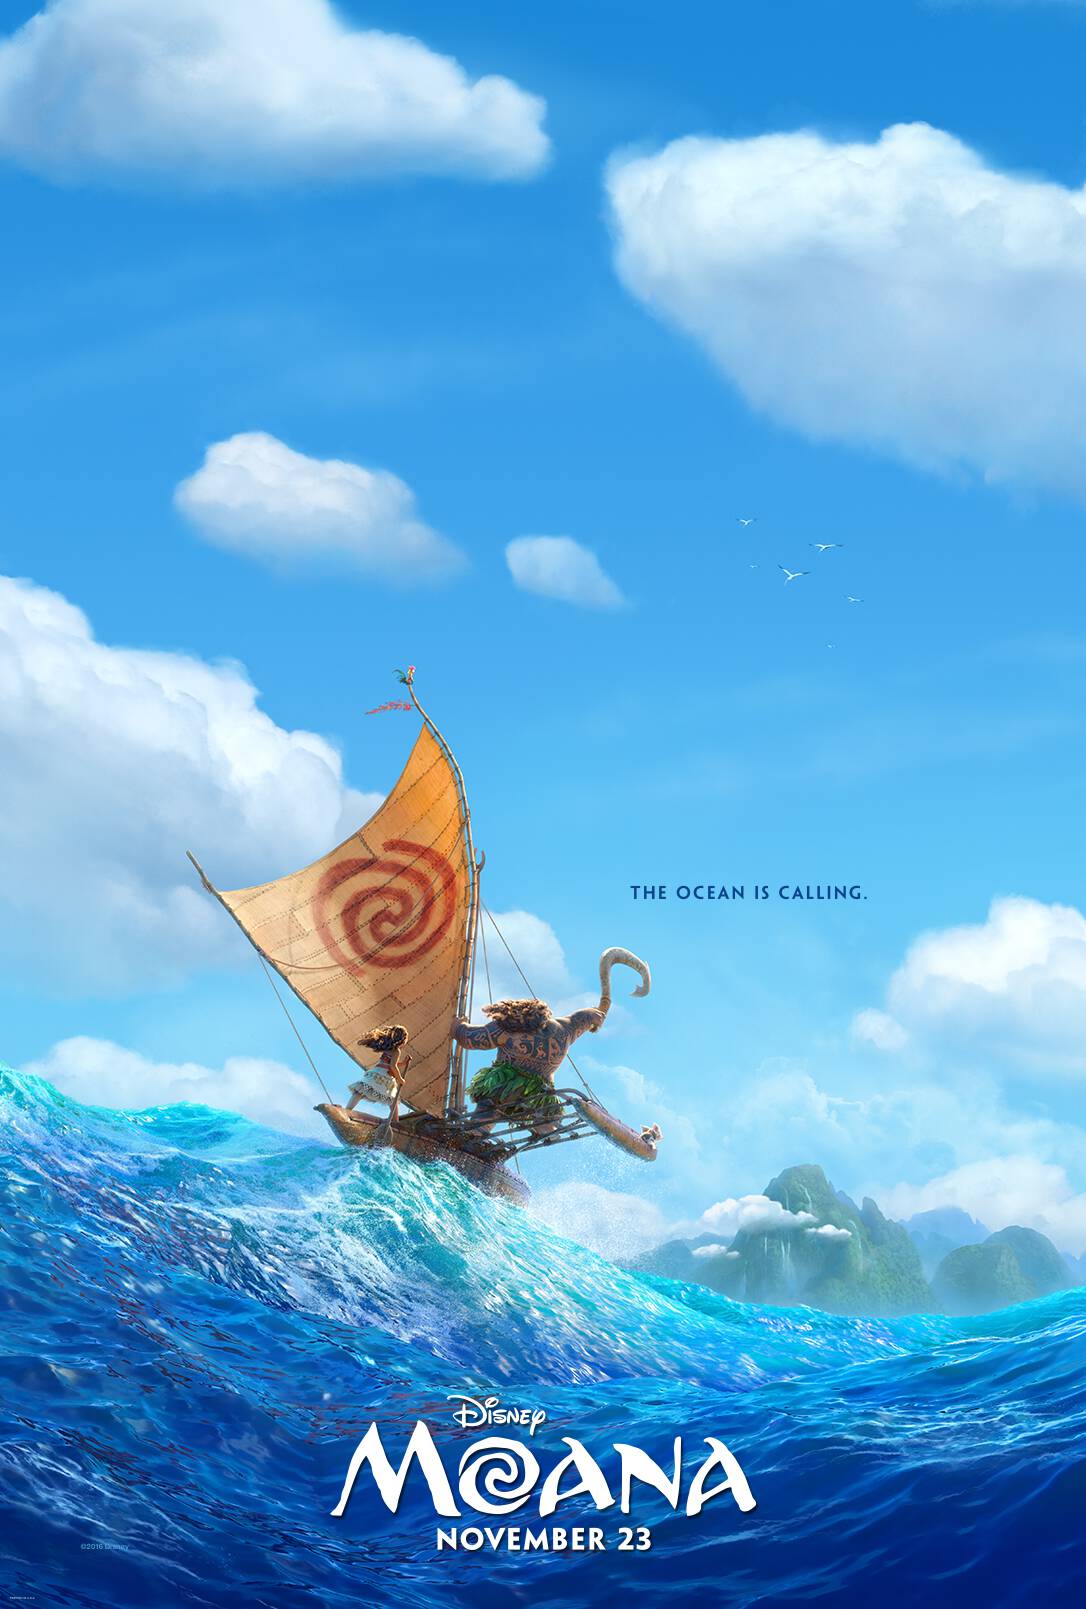 We can't wait for this movie! See the brand new MOANA characters and the fun TV spot. This film hits theaters November 23, 2016. Can't wait!